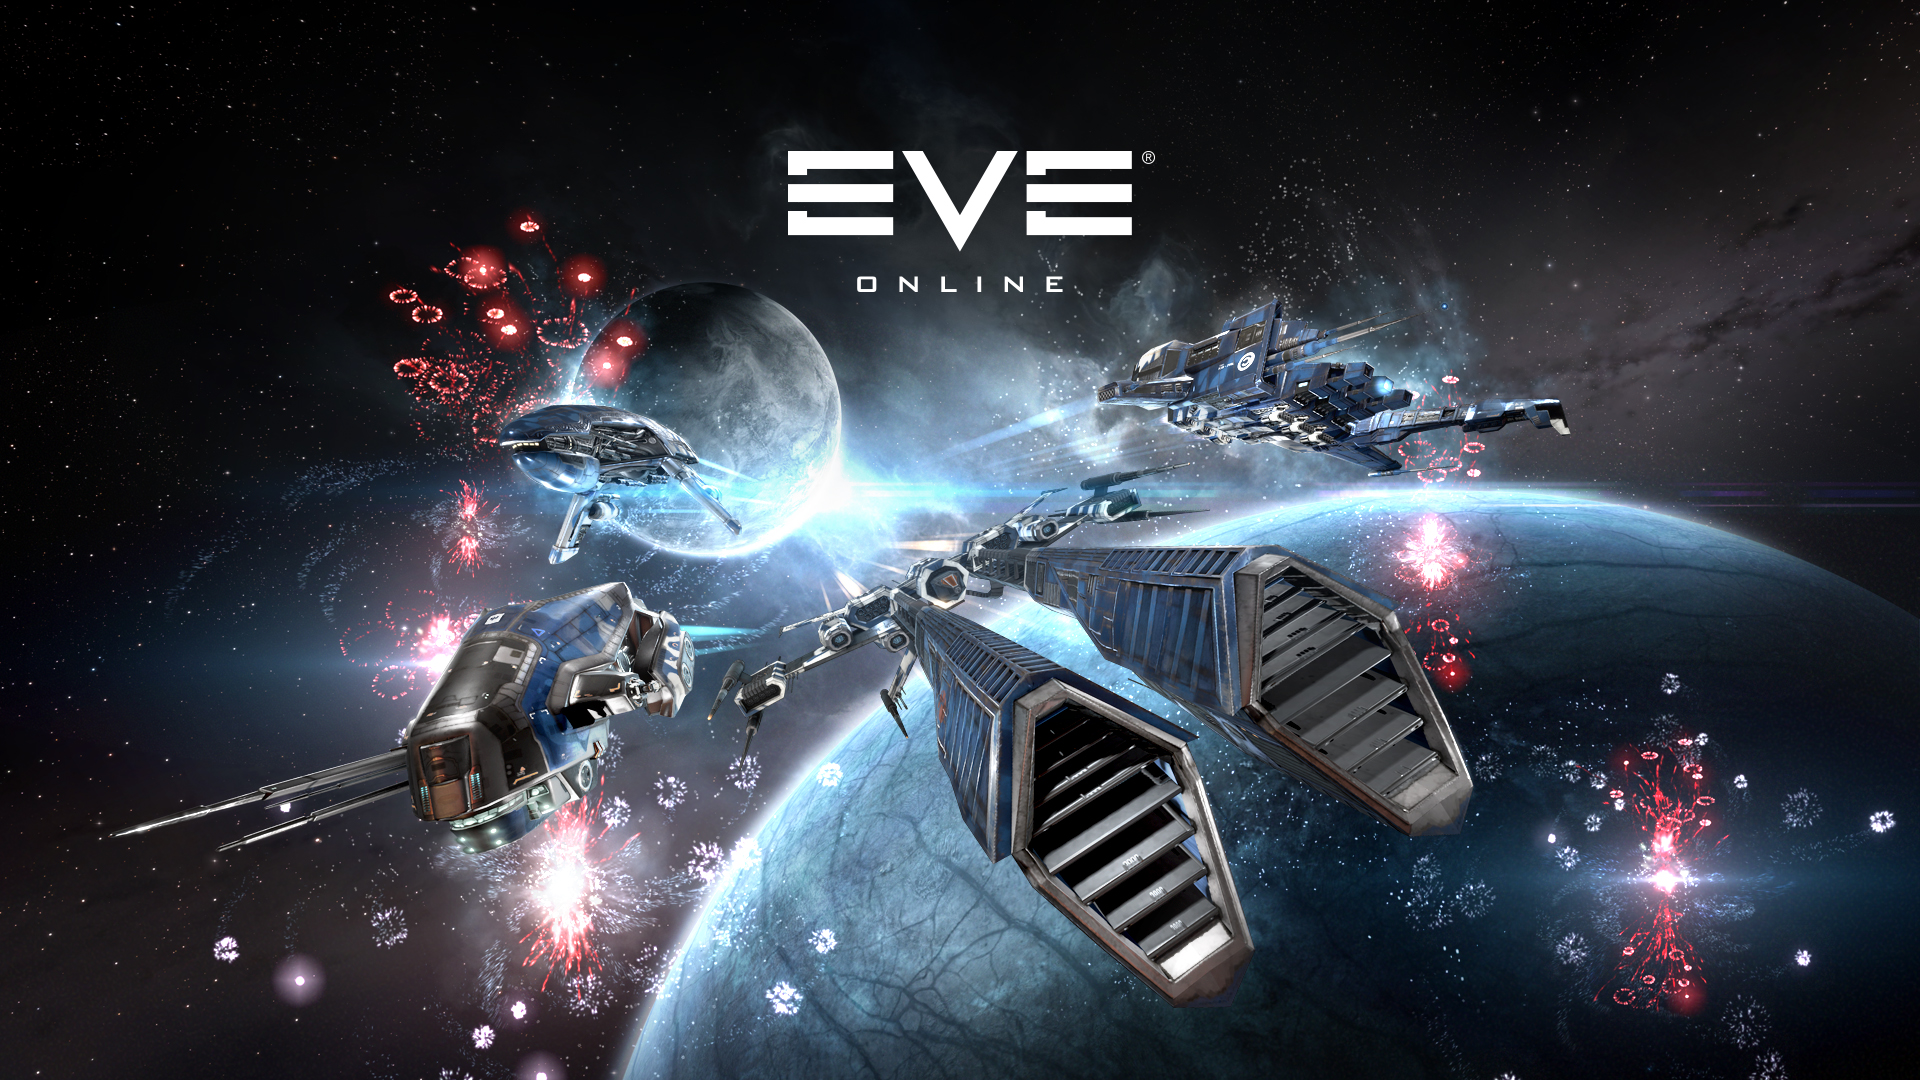 eve online wallpaper,pc game,spacecraft,games,mode of transport,vehicle